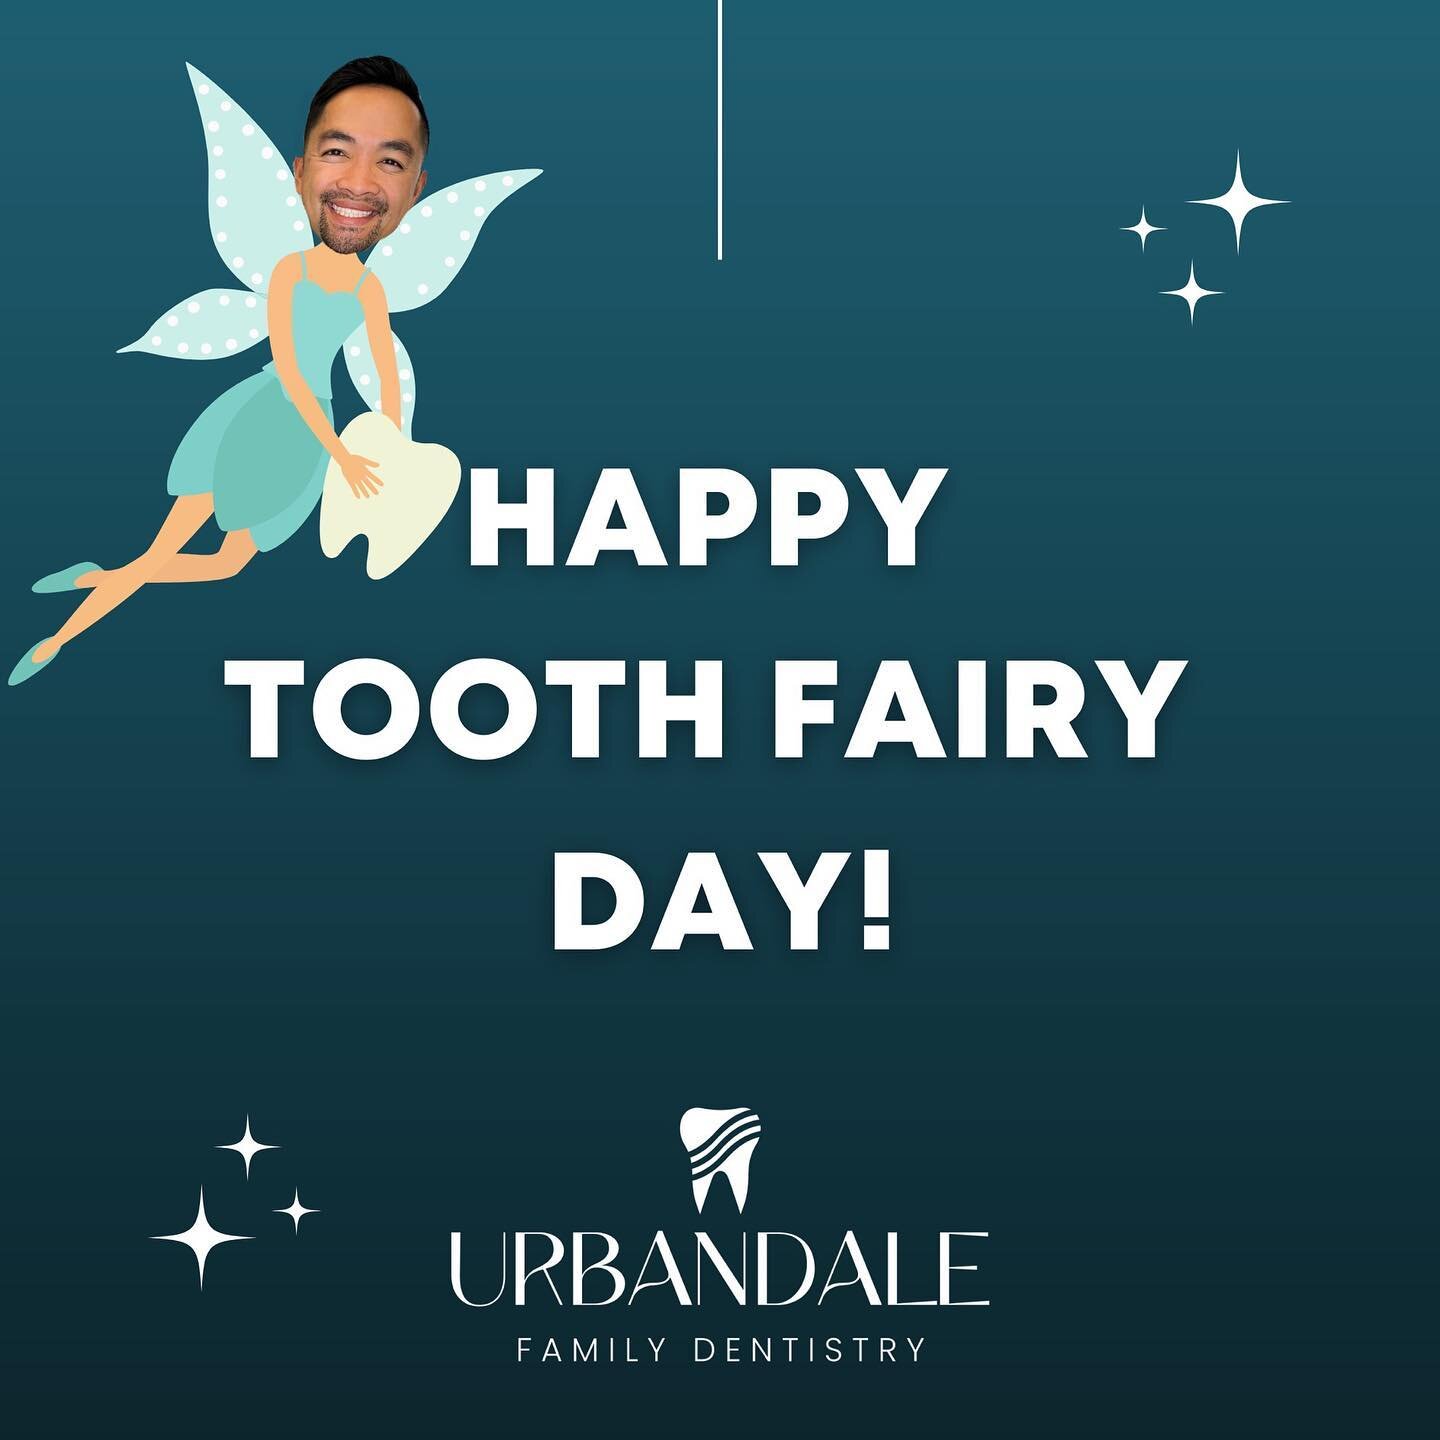 It&rsquo;s National Tooth Fairy Day! 🧚🏻🦷 With a new school year starting and kiddos getting older, there are sure to be many visits from the tooth fairy in the months ahead! Tooth Fairy Day happens twice a year and it&rsquo;s a fun reminder to mak